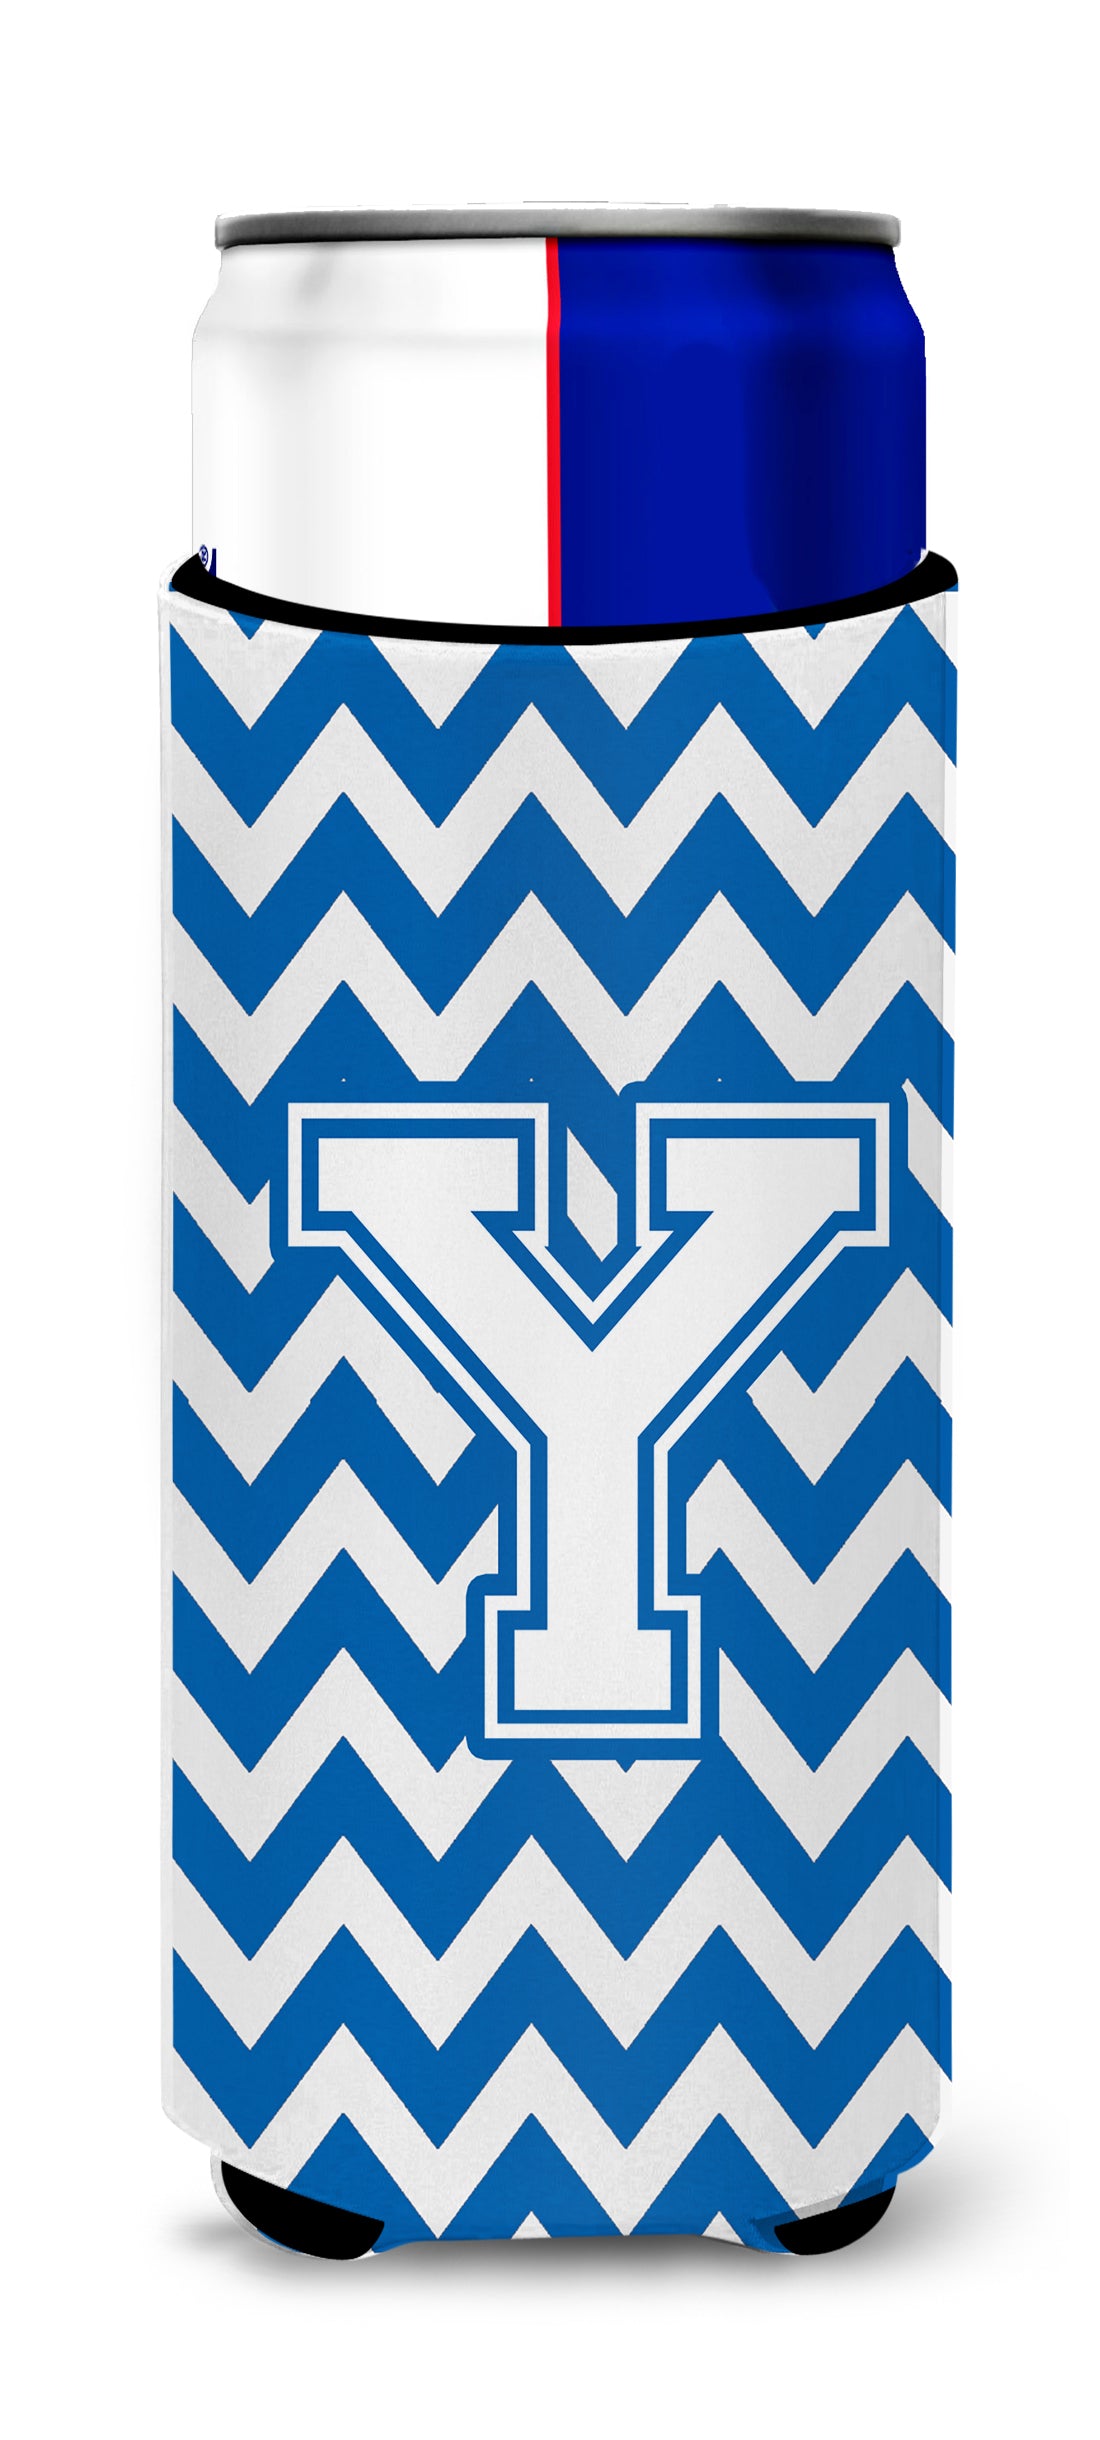 Letter Y Chevron Blue and White Ultra Beverage Insulators for slim cans CJ1045-YMUK.